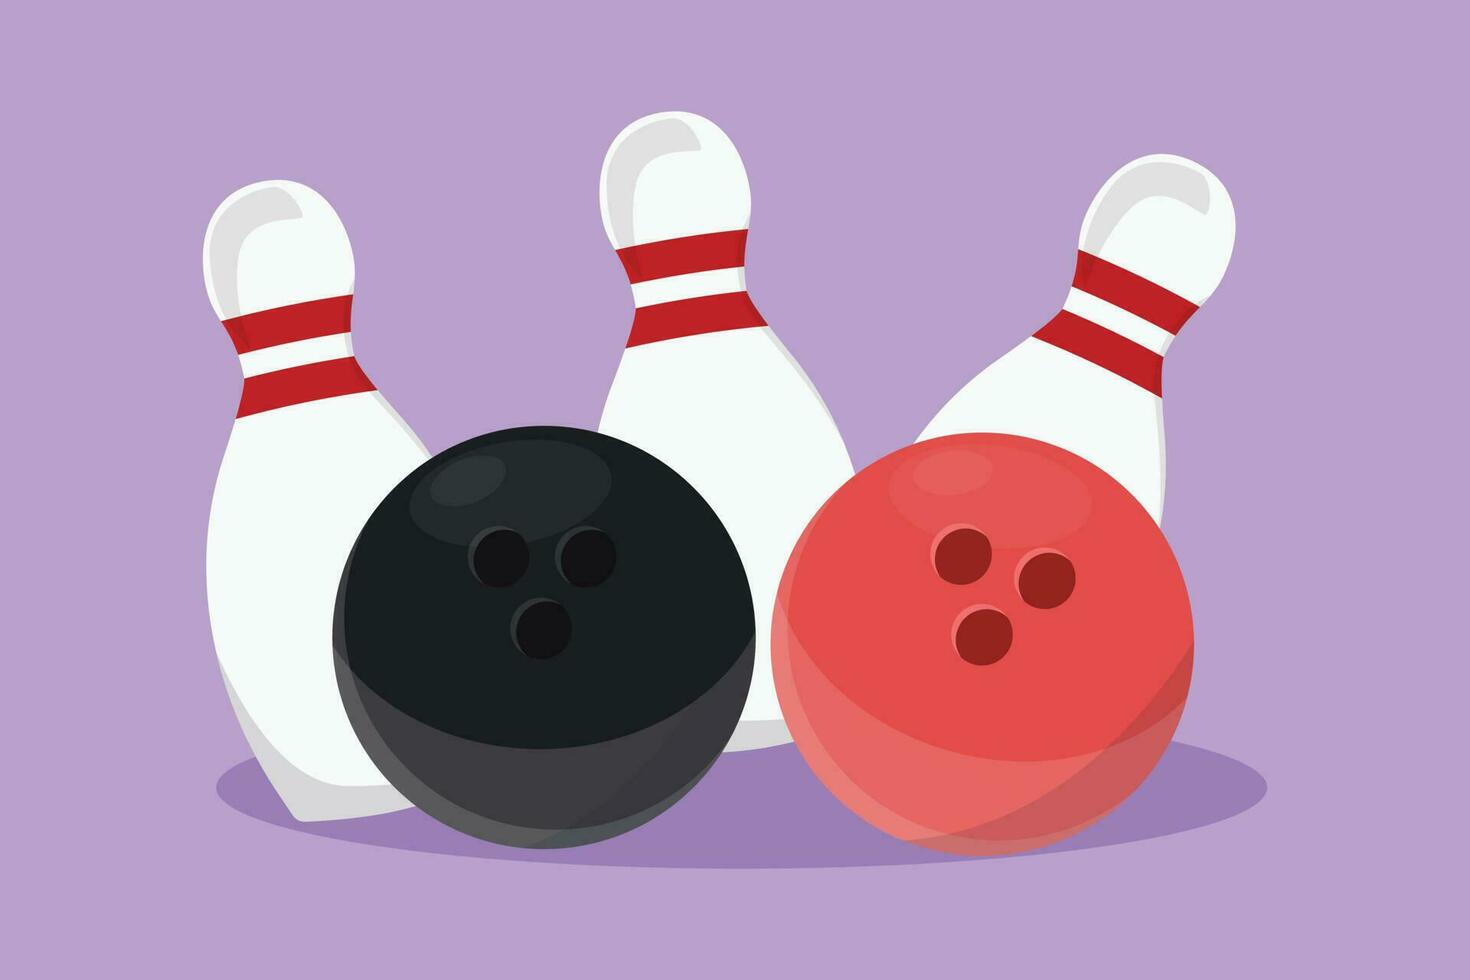 Cartoon flat style drawing bowling ball and pins. Bowling sport game equipment. Ball crashing pins. Bowling pins lined up at lane. Doing sport hobby at leisure time. Graphic design vector illustration